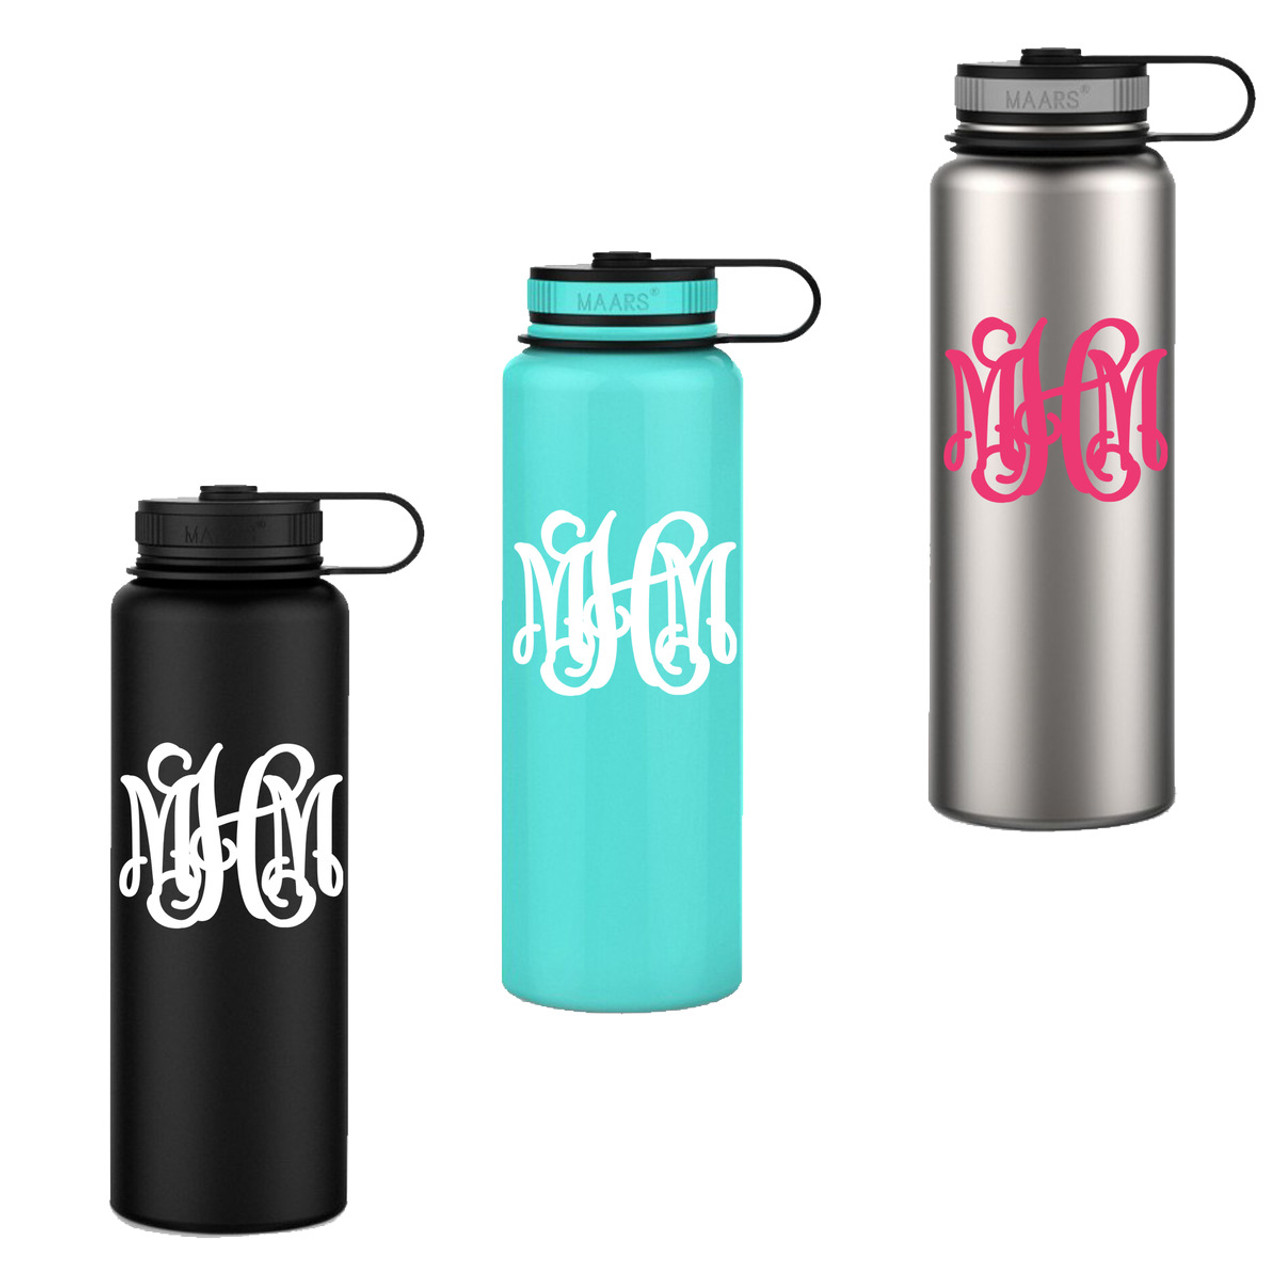 https://cdn11.bigcommerce.com/s-rrje11zjnk/images/stencil/1280x1280/products/30221/44616/monogrammed-stainless-water-bottle-40oz__90636.1624617064.jpg?c=1